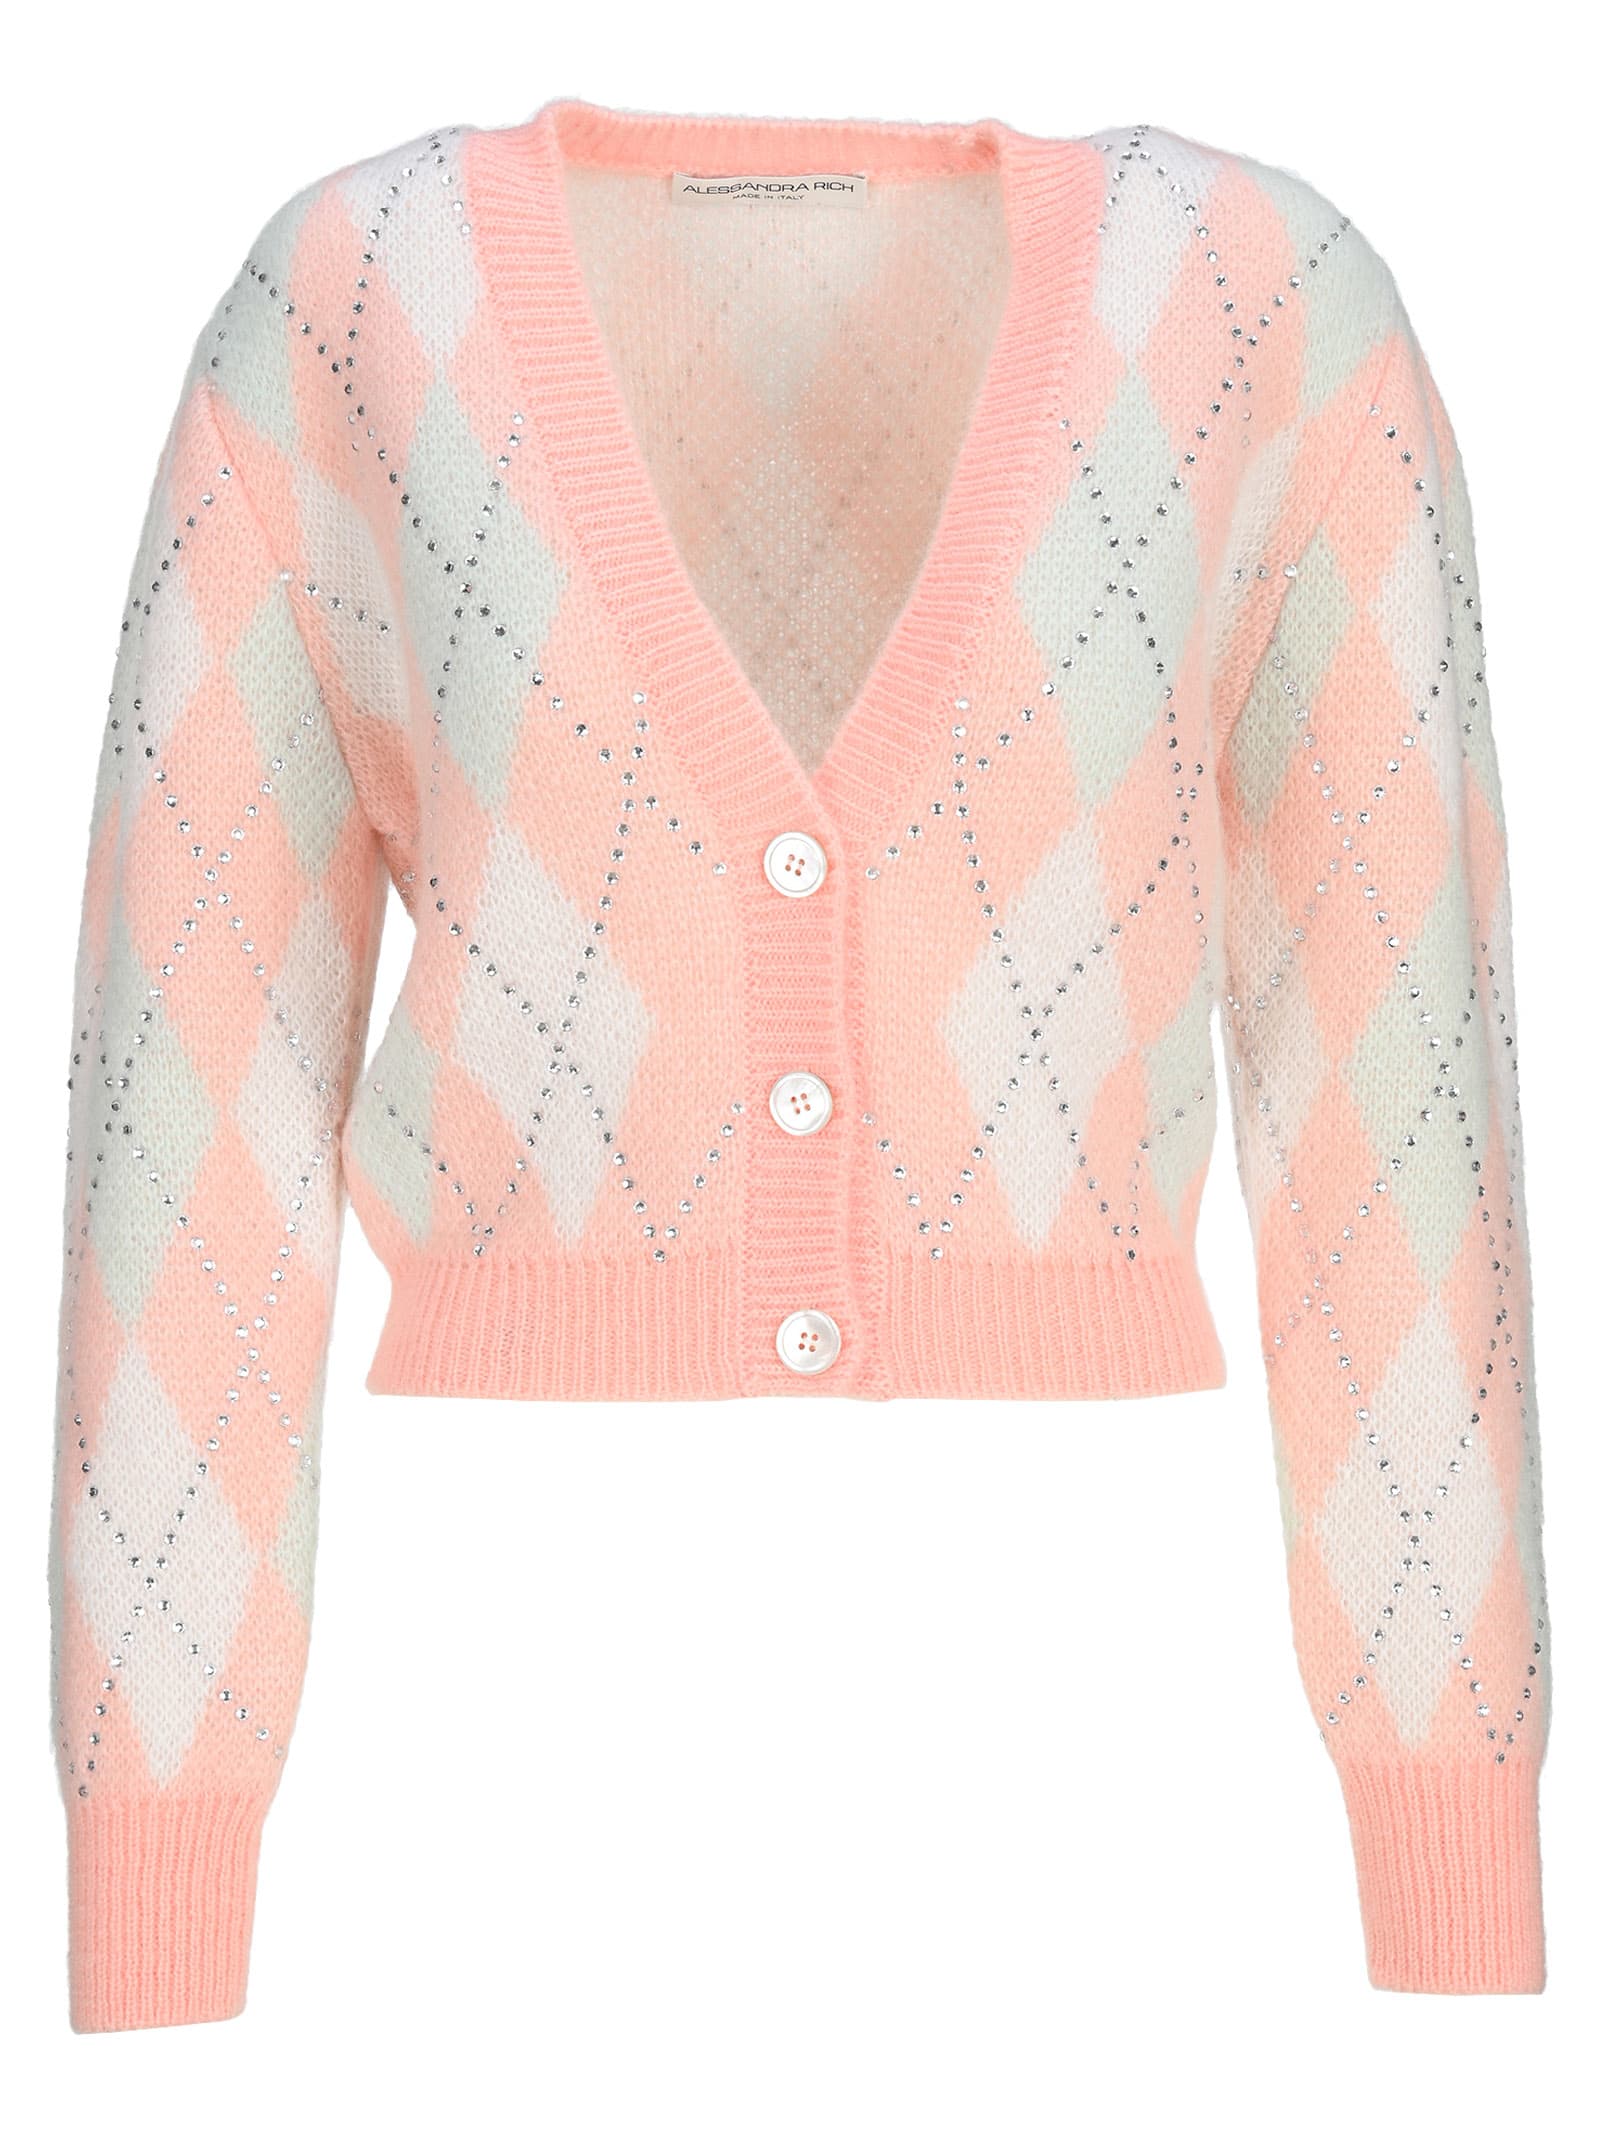 Alessandra Rich Argyle Wool Cropped Cardigan With Hotfix Crystals